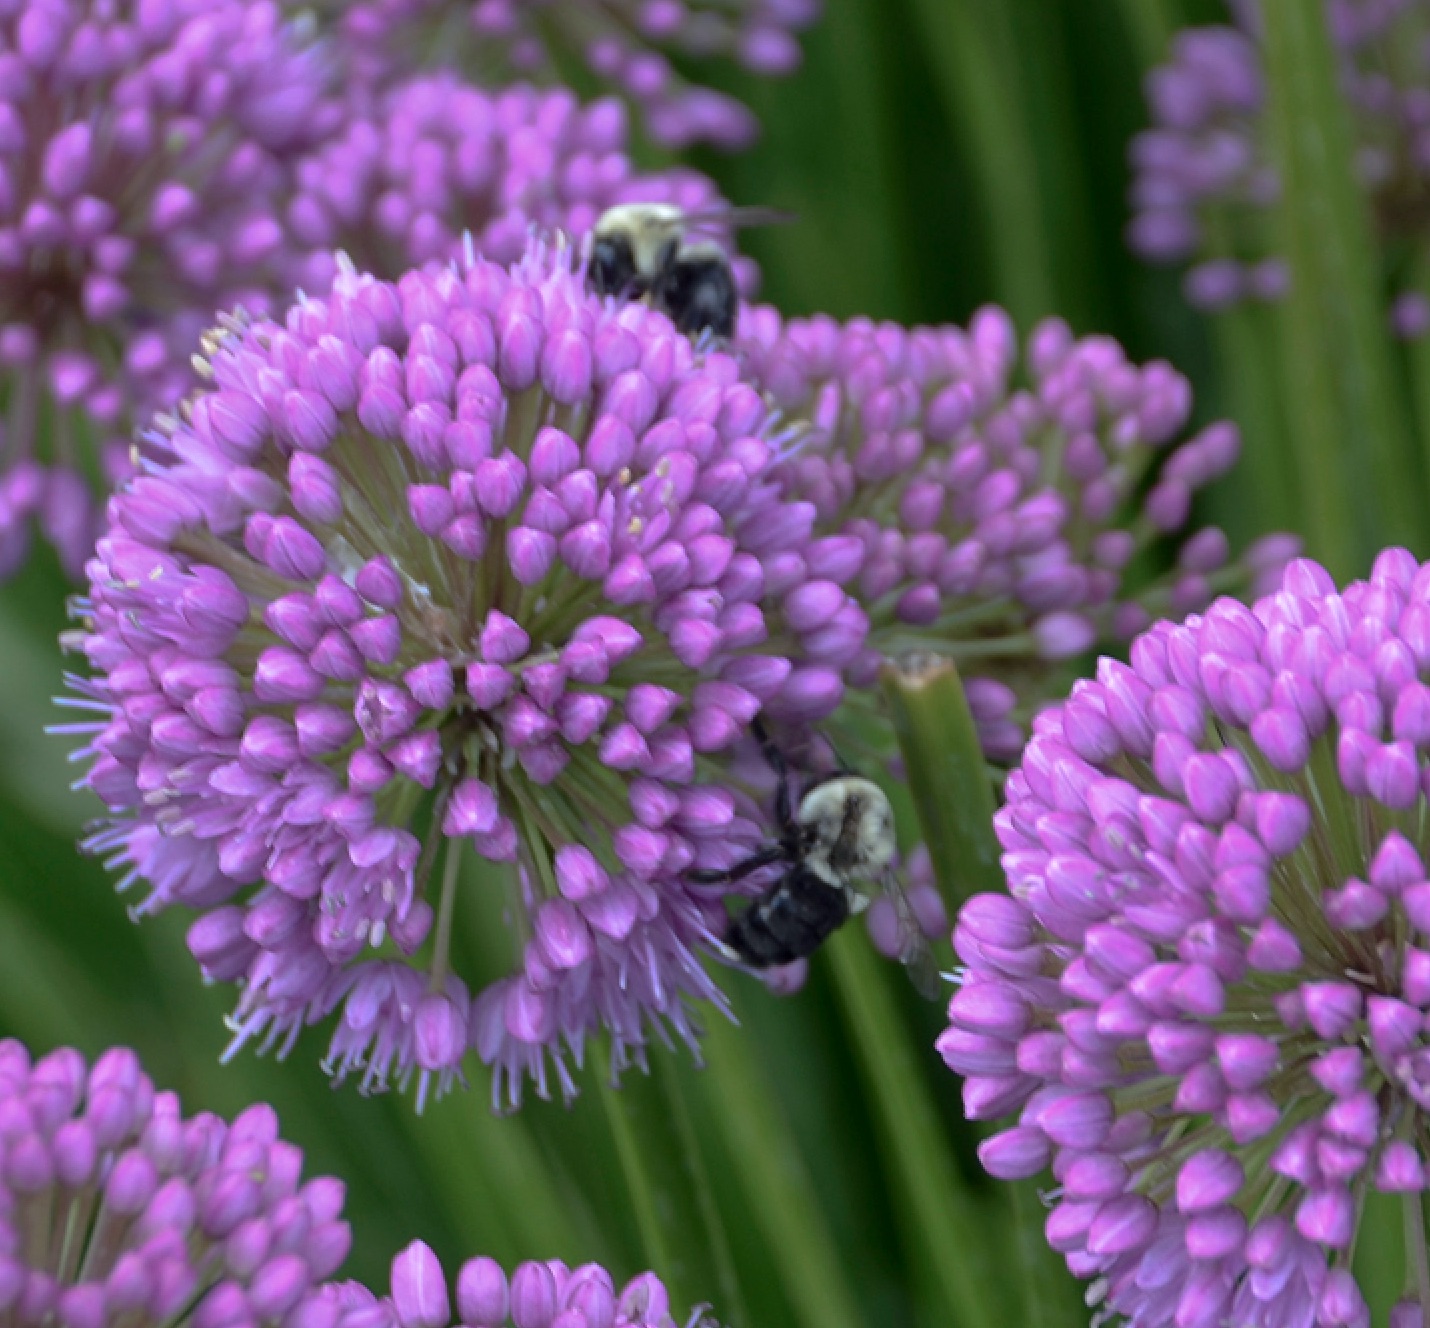 Bees, butterflies and other pollinating insects are frequent visitors to alliums. Photo courtesy perennial resource.com